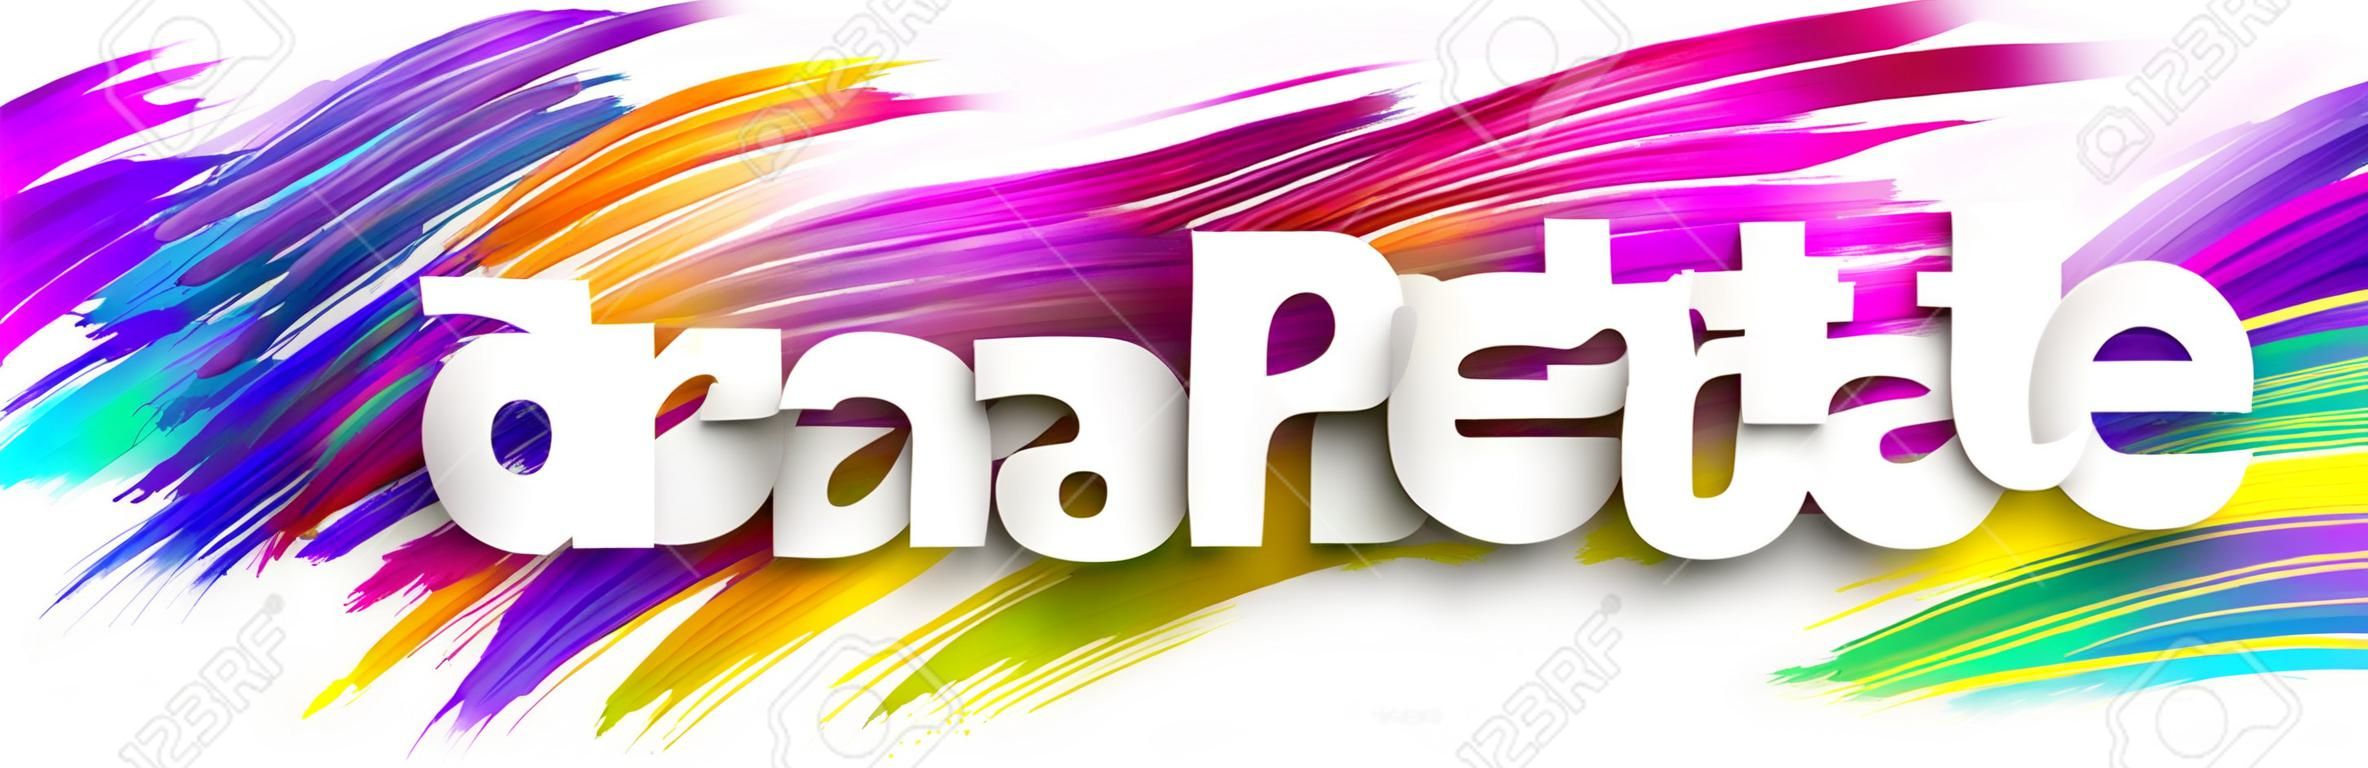 Small letters just breathe sign on multi-colored brush strokes background. Vector design element for banners, posters, cards, website.